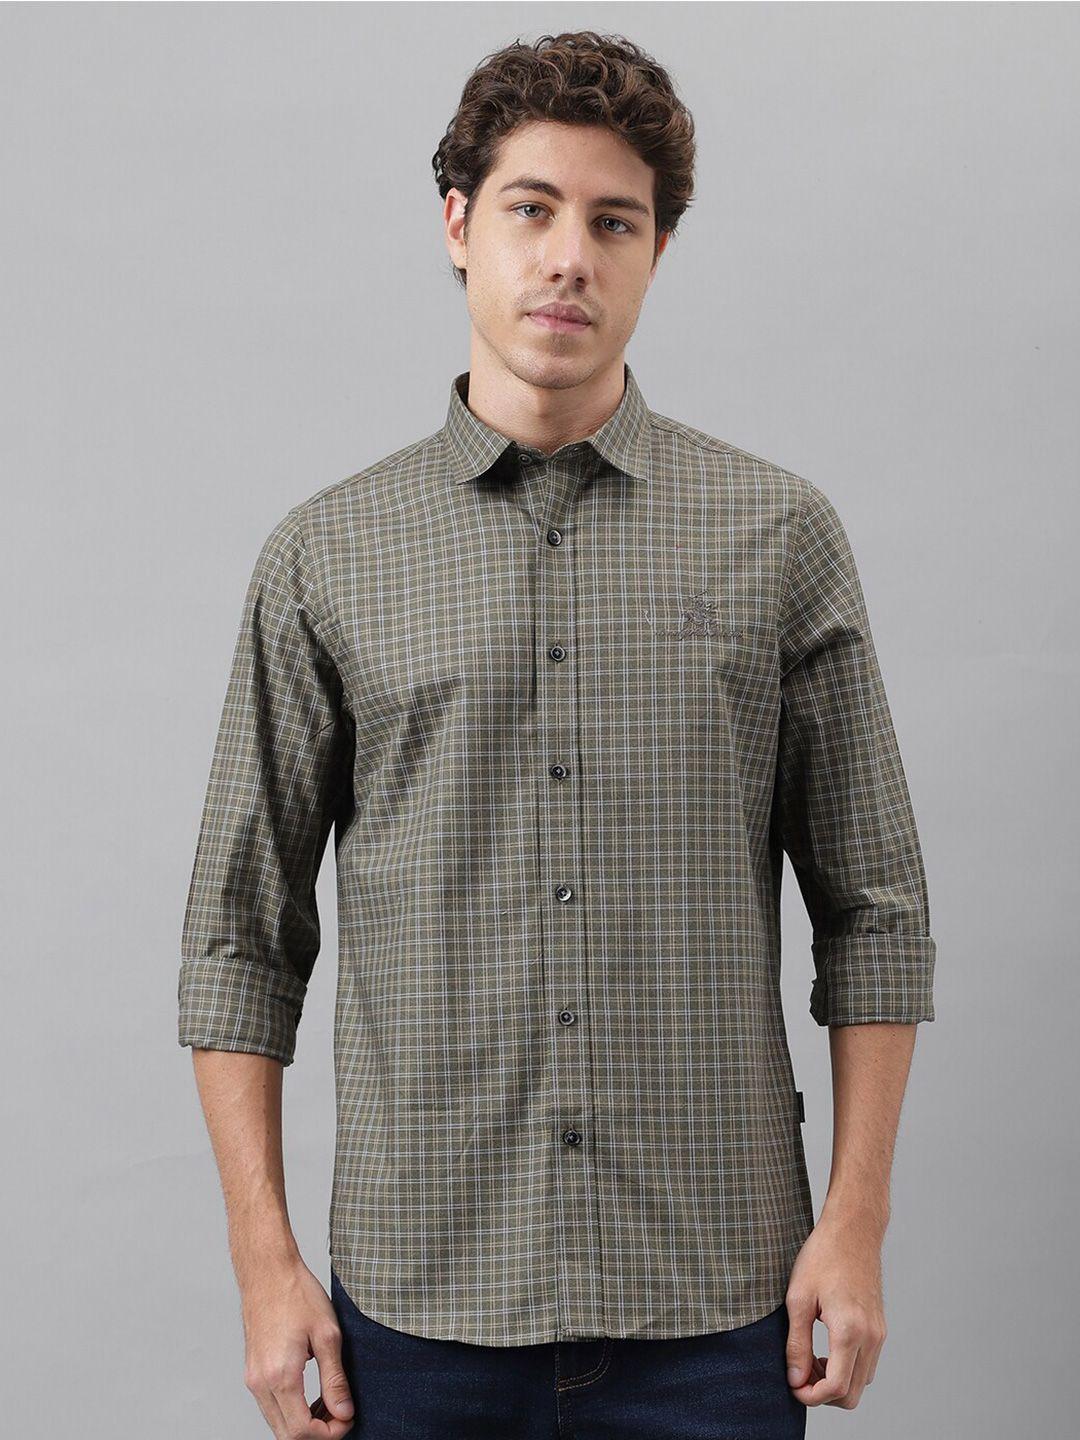 beverly hills polo club other checks tailored fit cotton casual shirt